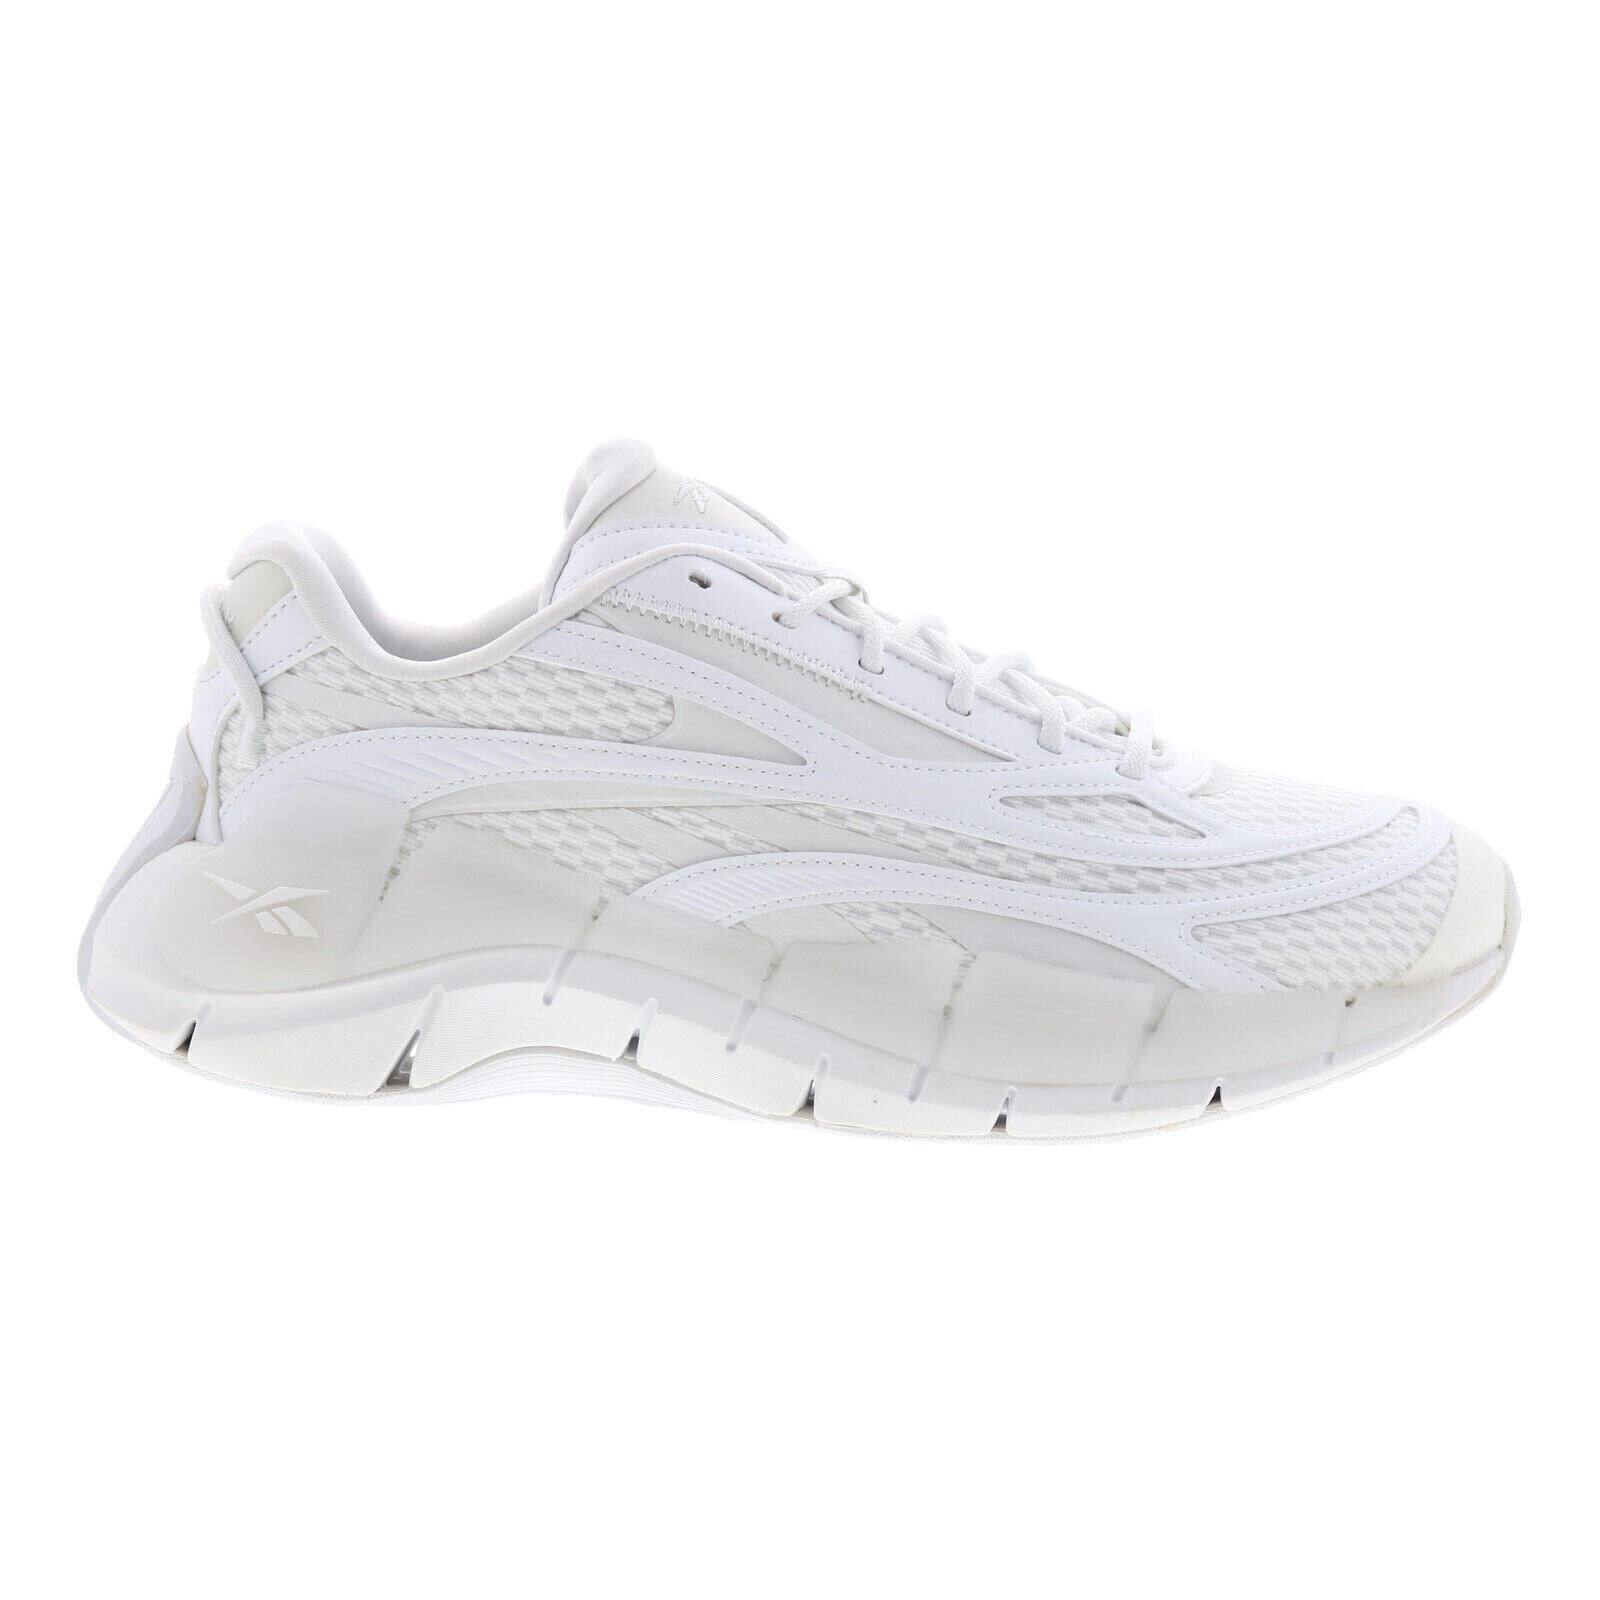 Reebok Zig Kinetica 2.5 GX0131 Mens White Synthetic Athletic Running Shoes